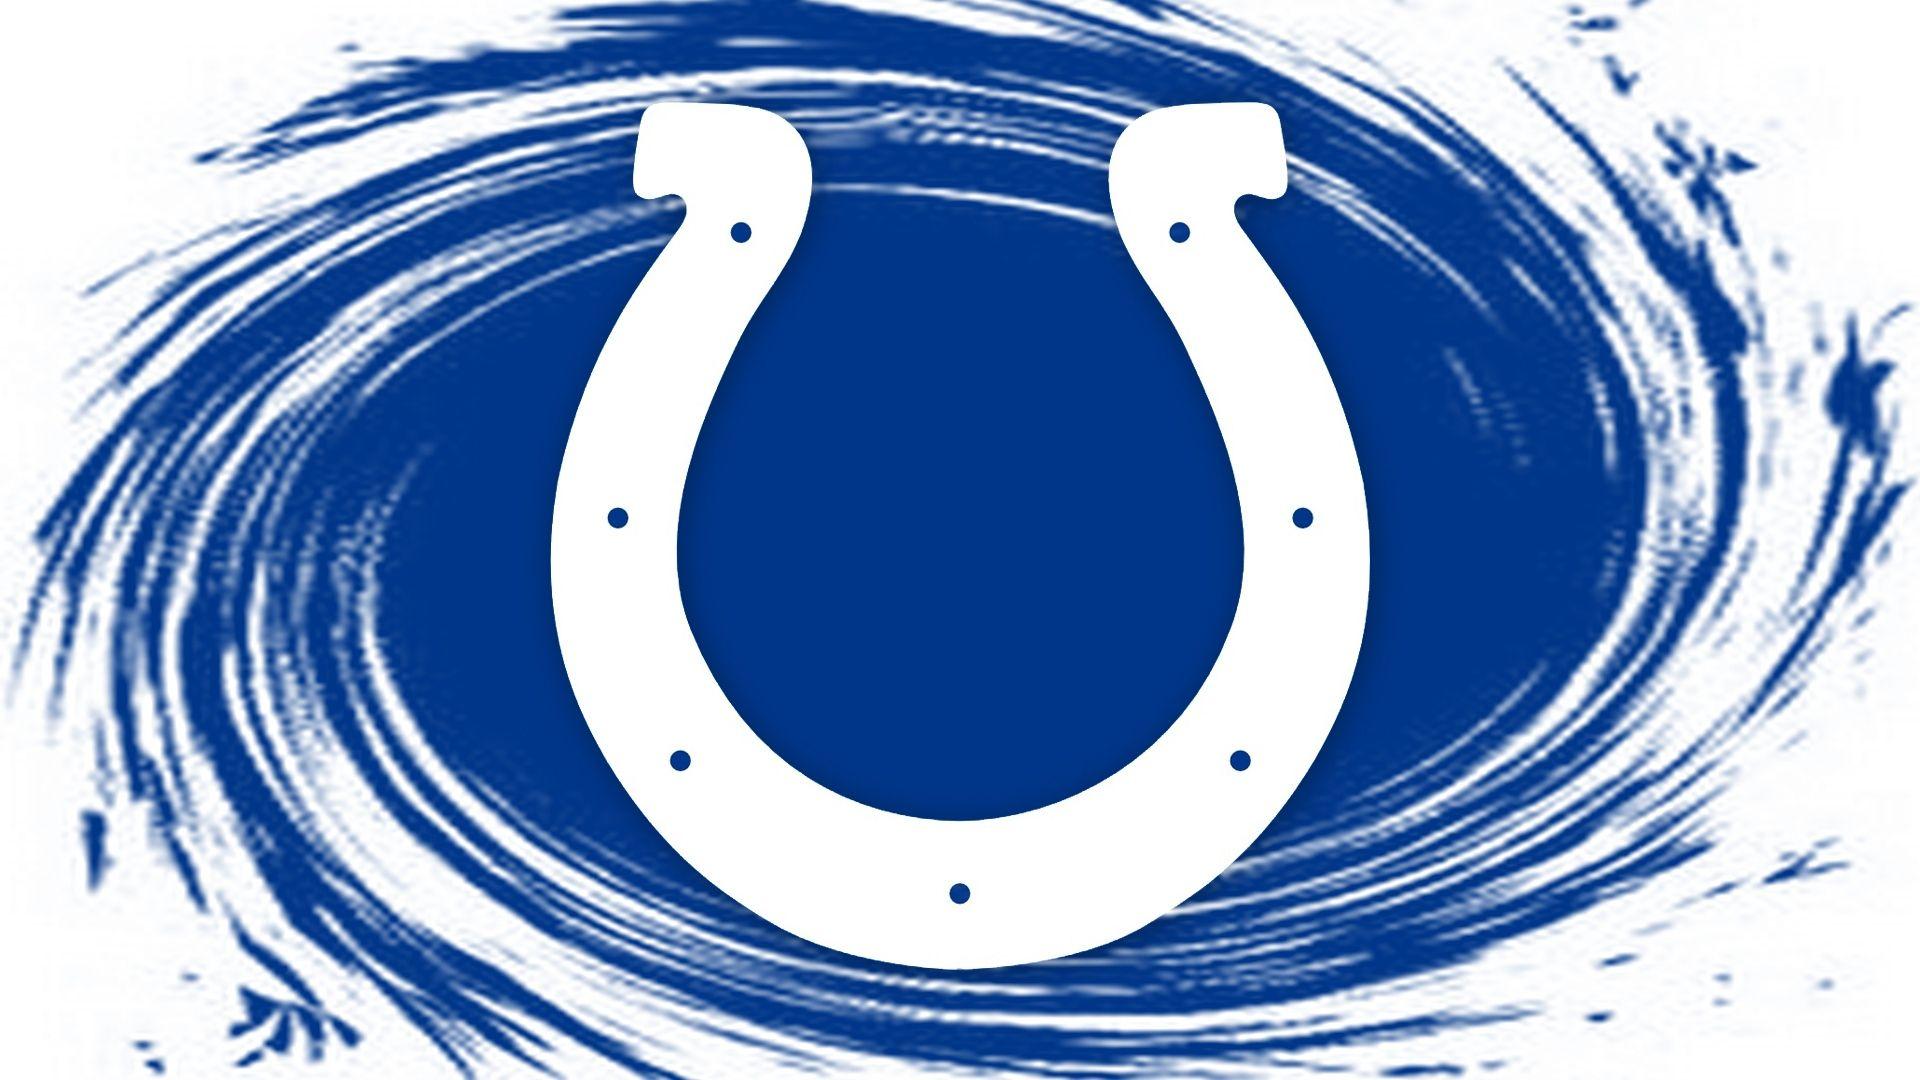 Colts Football Logo - NFL Indianapolis Colts Logo Blue Whirlpool 1920x1080 HD NFL ...